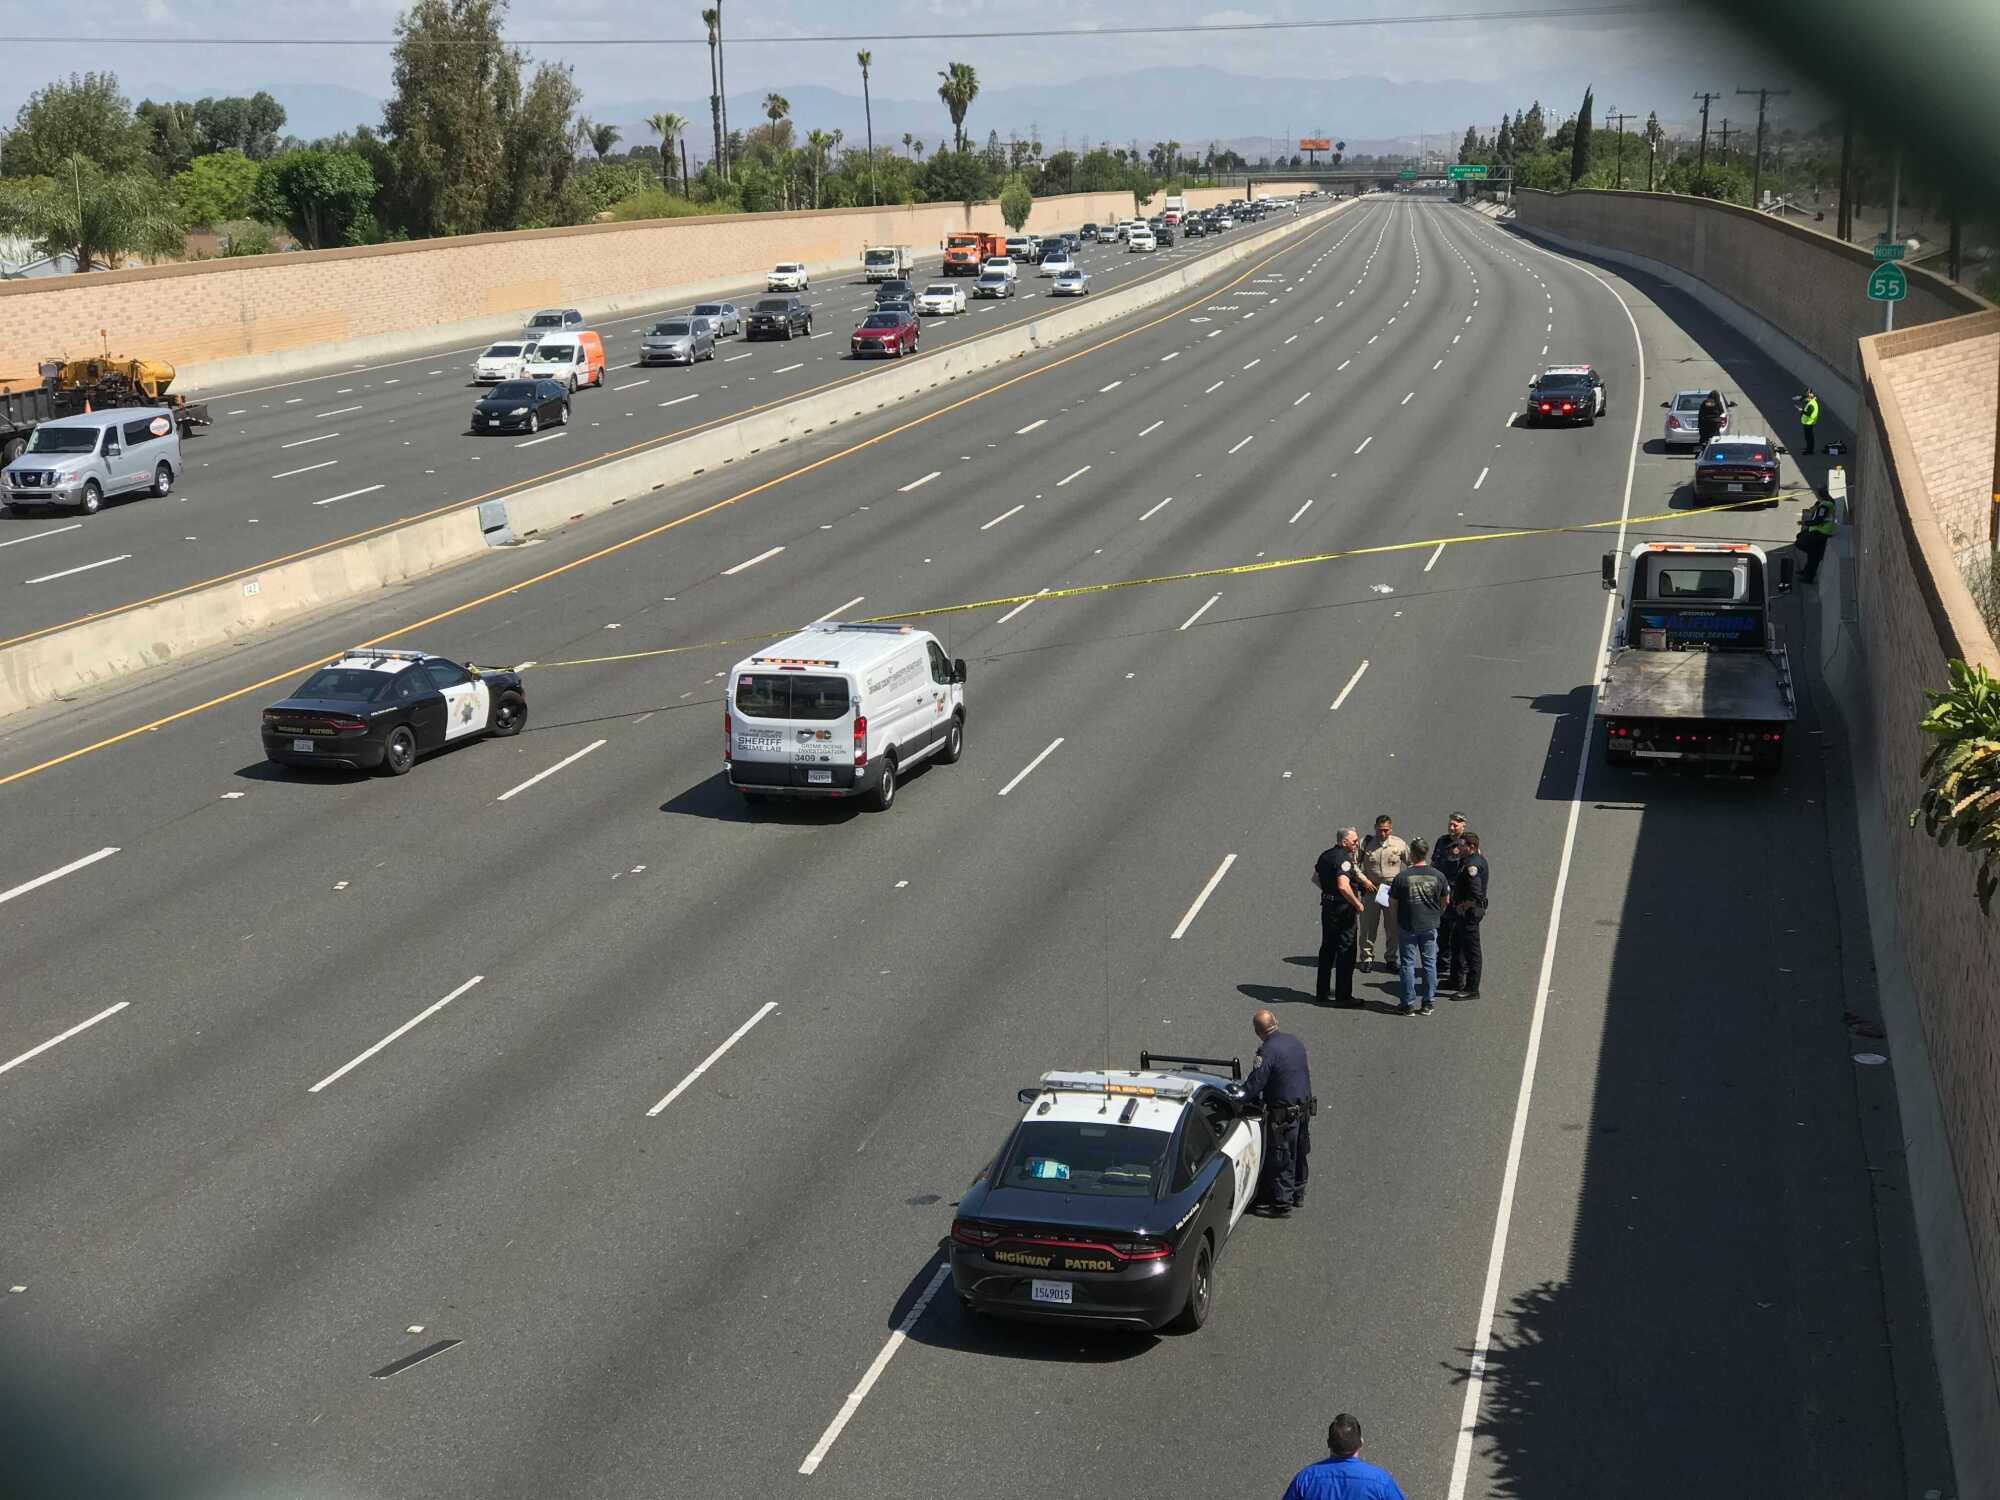 Law enforcement officials examine the scene on the northbound 55 Freeway after Aiden Leos was fatally shot on May 21.